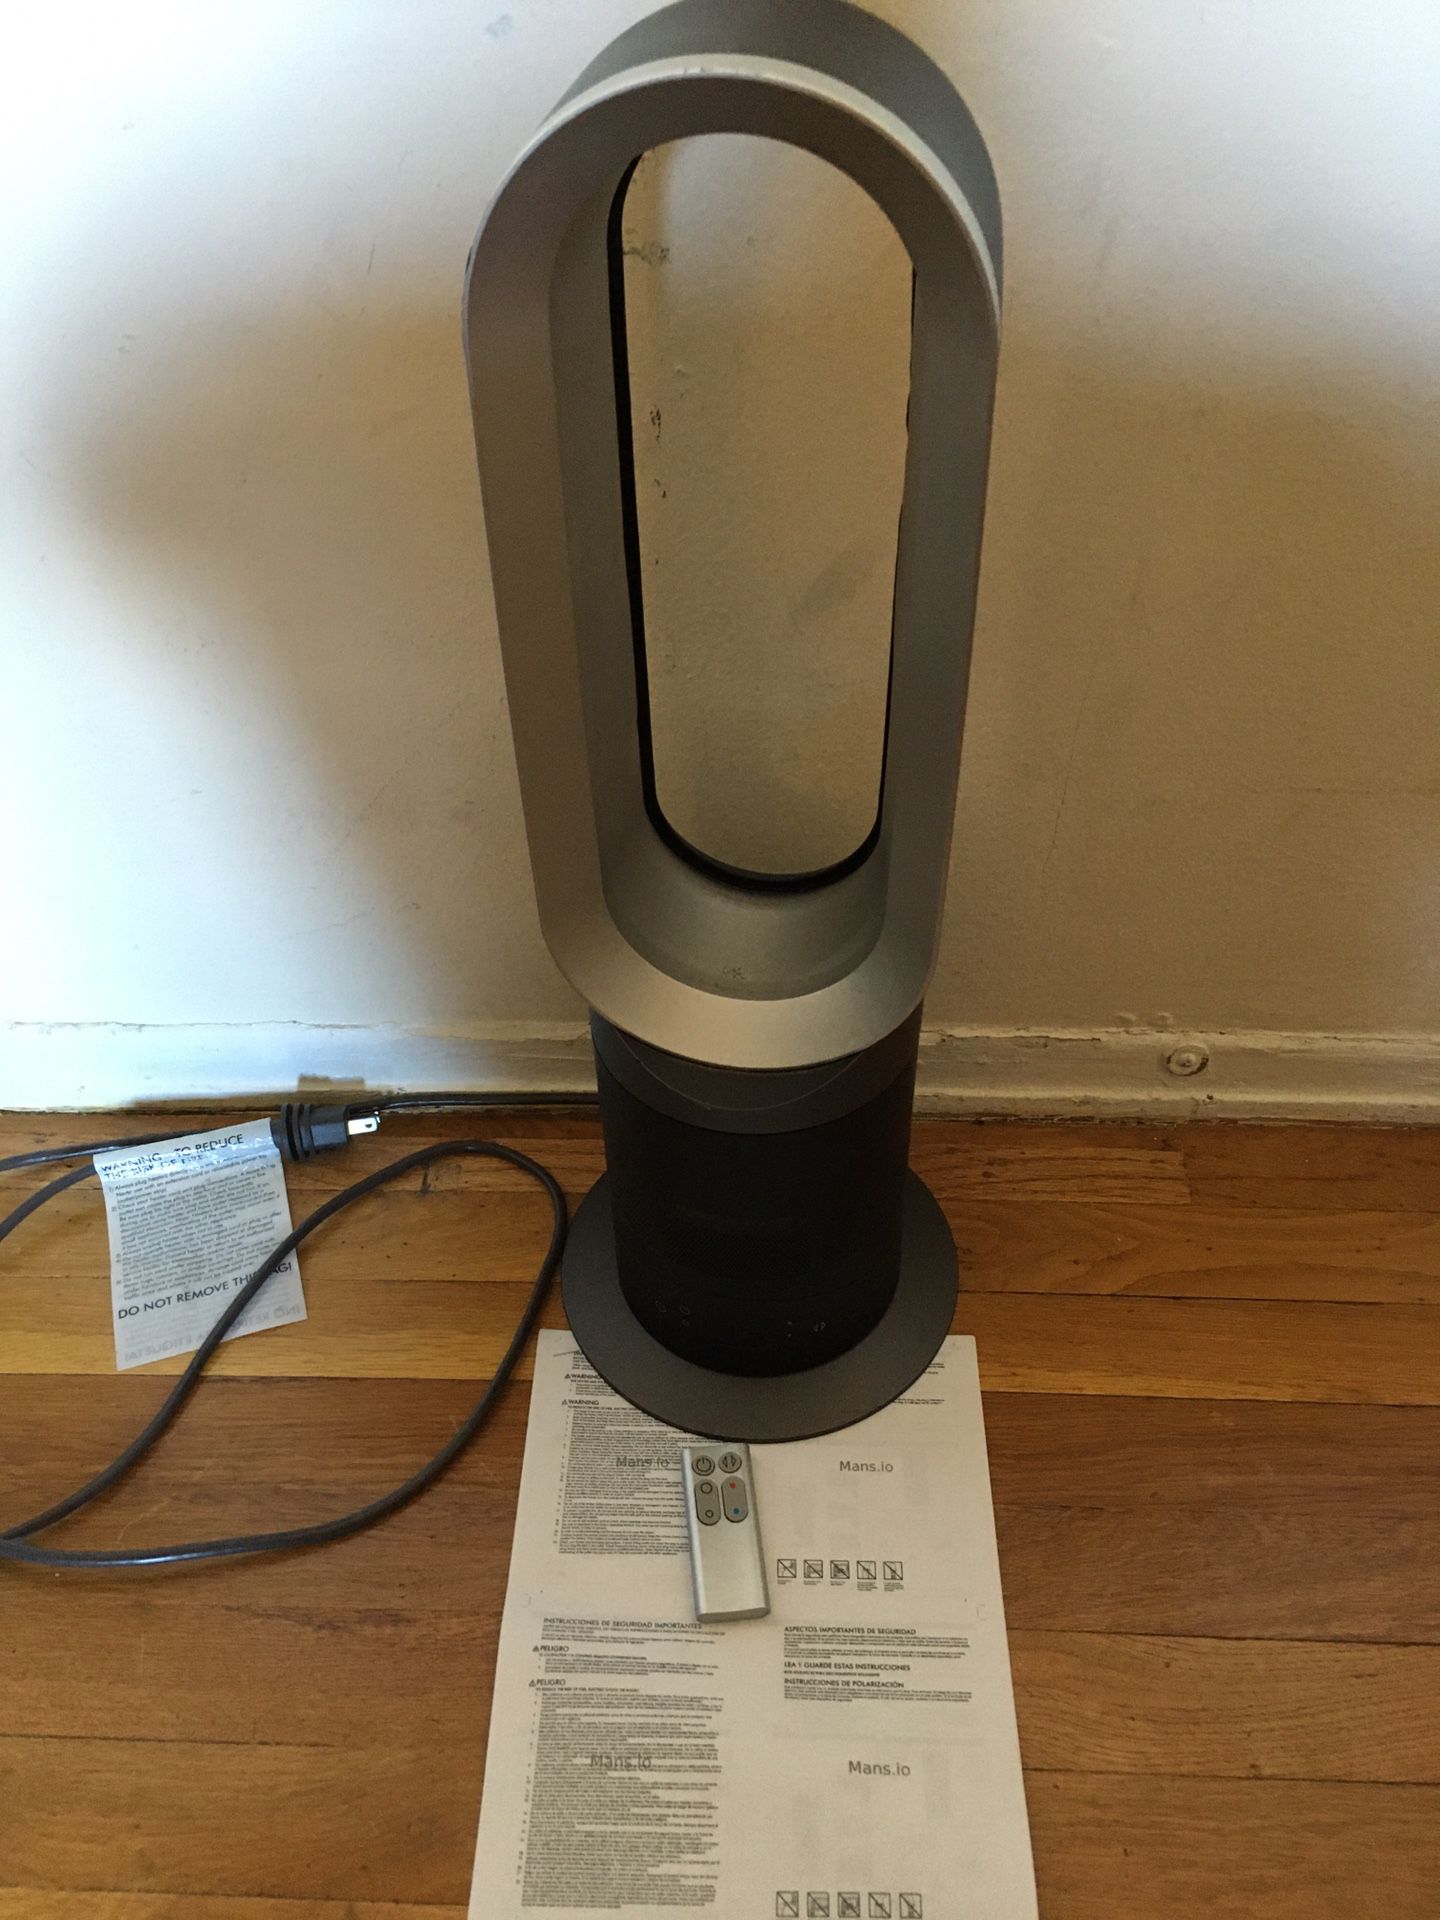 Dyson Hot+Cool Air Multiplier, Jet Focus Fan Heater Silver/grey- AM05  In good working condition   Will ship in non-retail box.  Comes with remote and